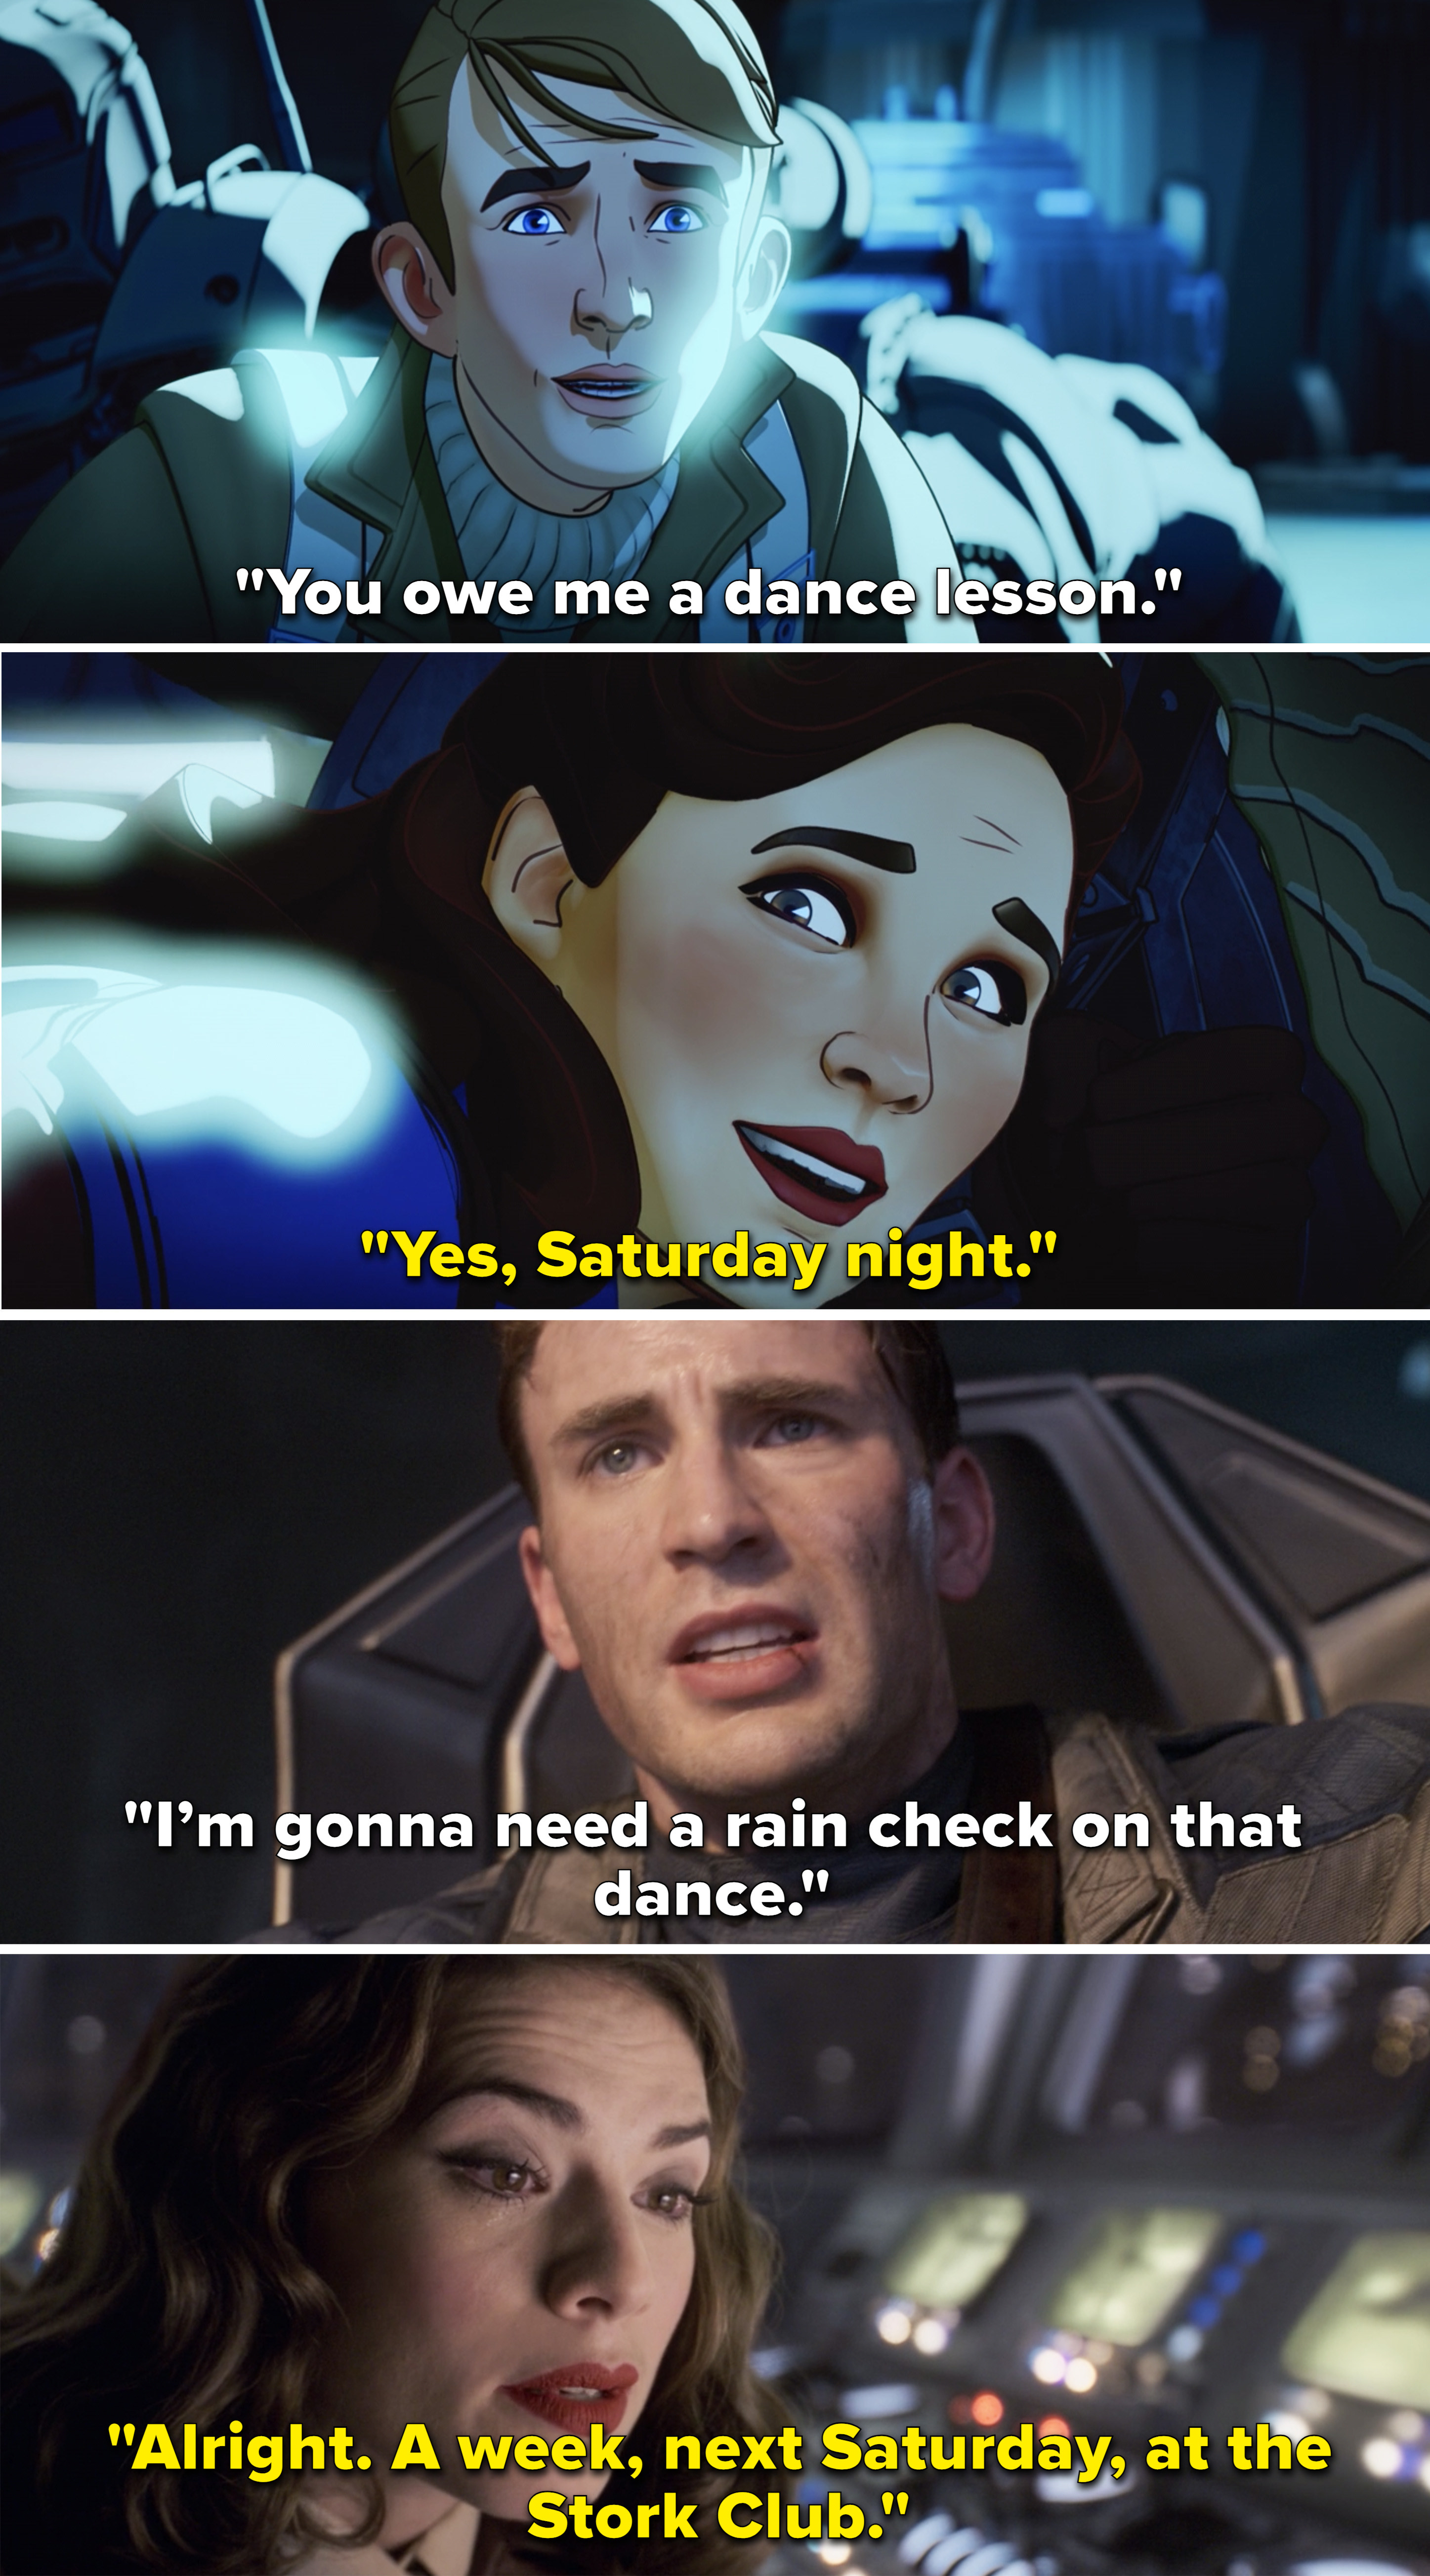 Steve telling Peggy he owes her a dance vs. Peggy telling Steve to meet her next Saturday for a dance